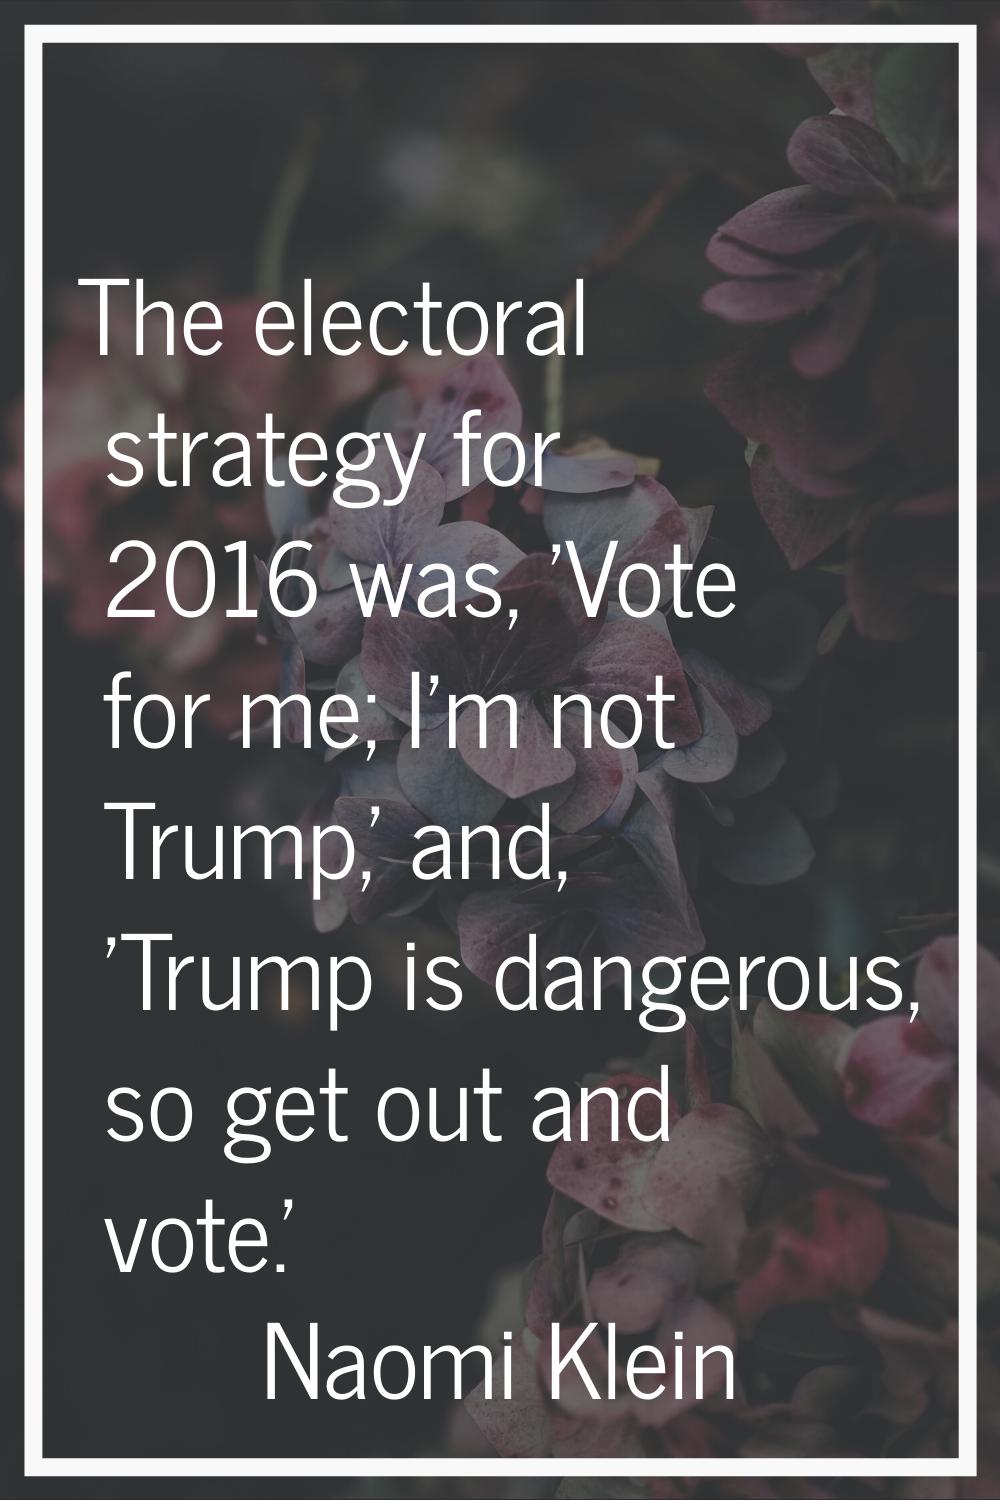 The electoral strategy for 2016 was, 'Vote for me; I'm not Trump,' and, 'Trump is dangerous, so get